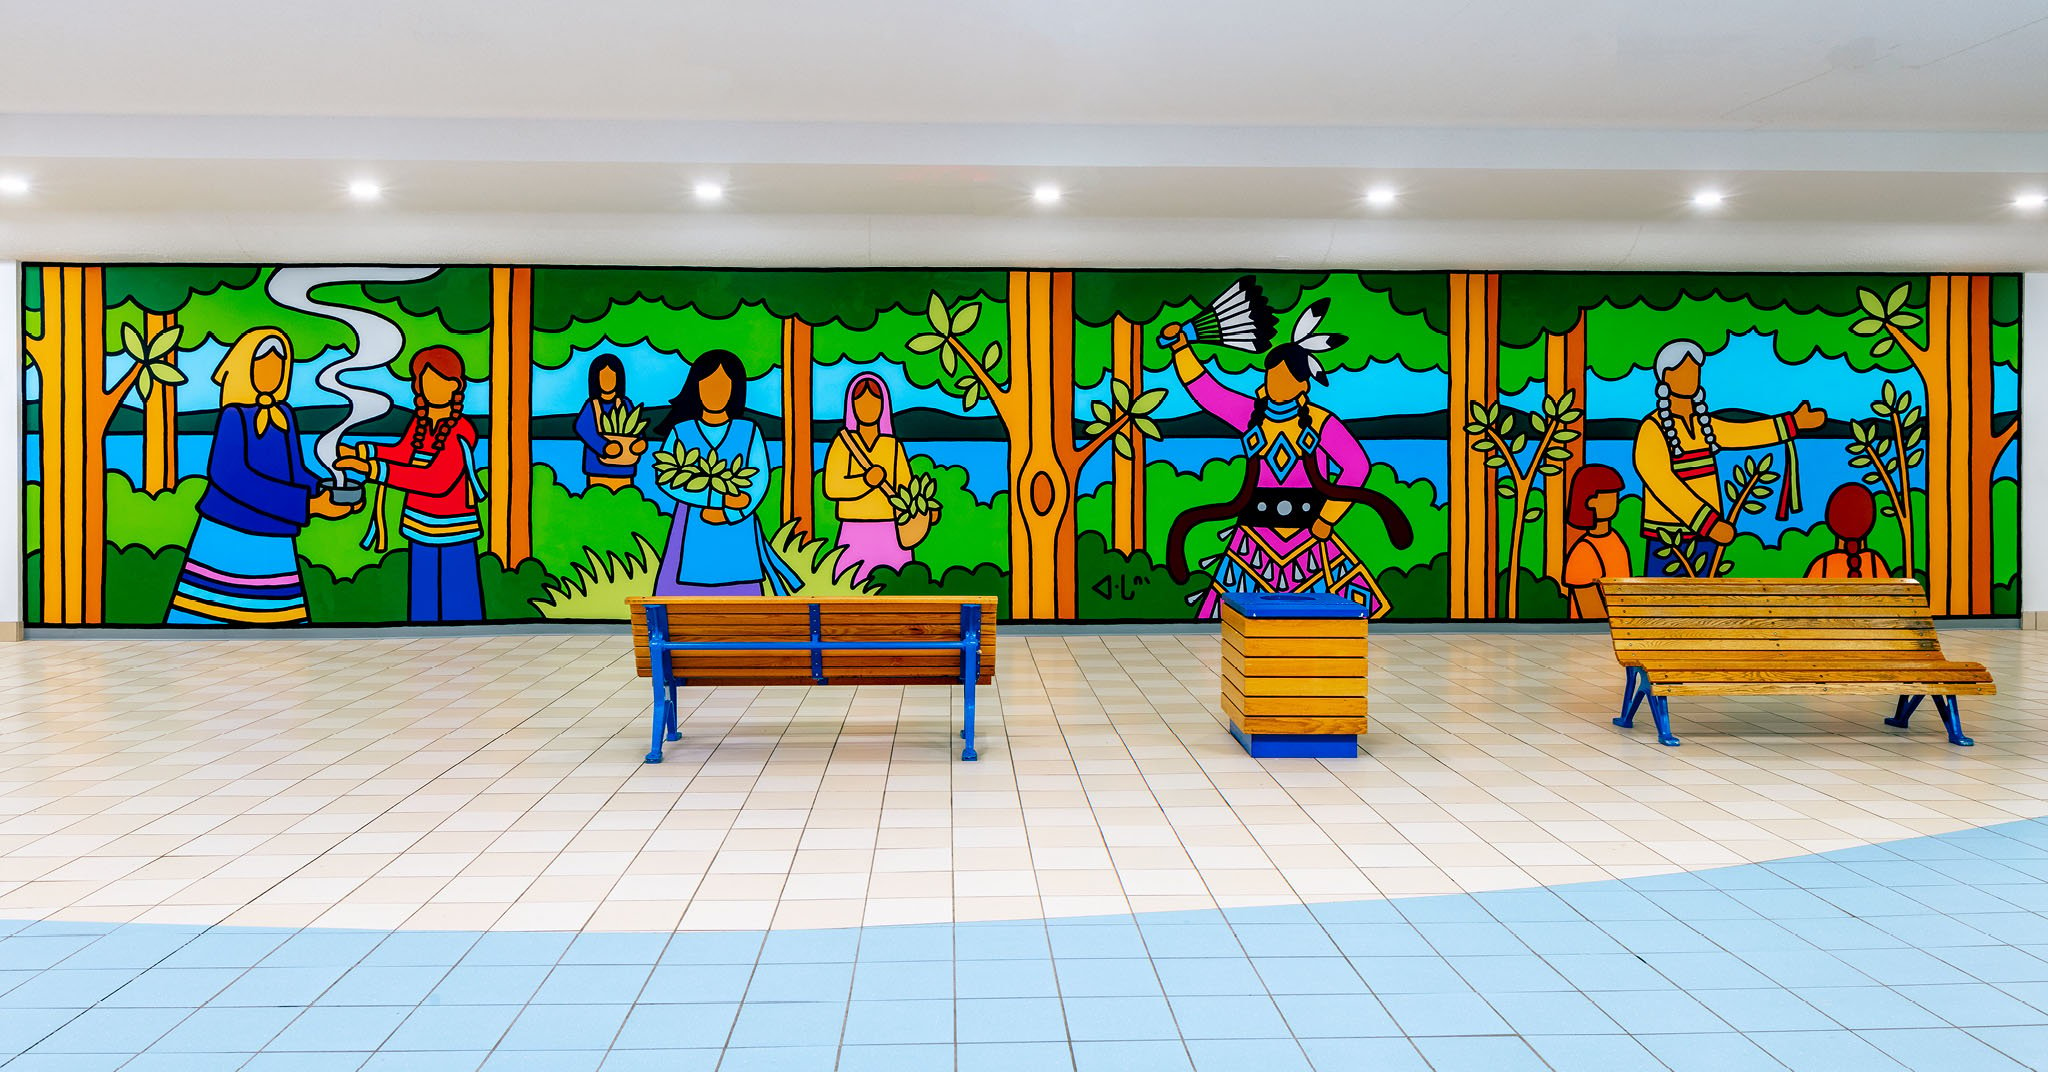 Investing and Connecting with a Community: Wetaskiwin Mall’s New Mural